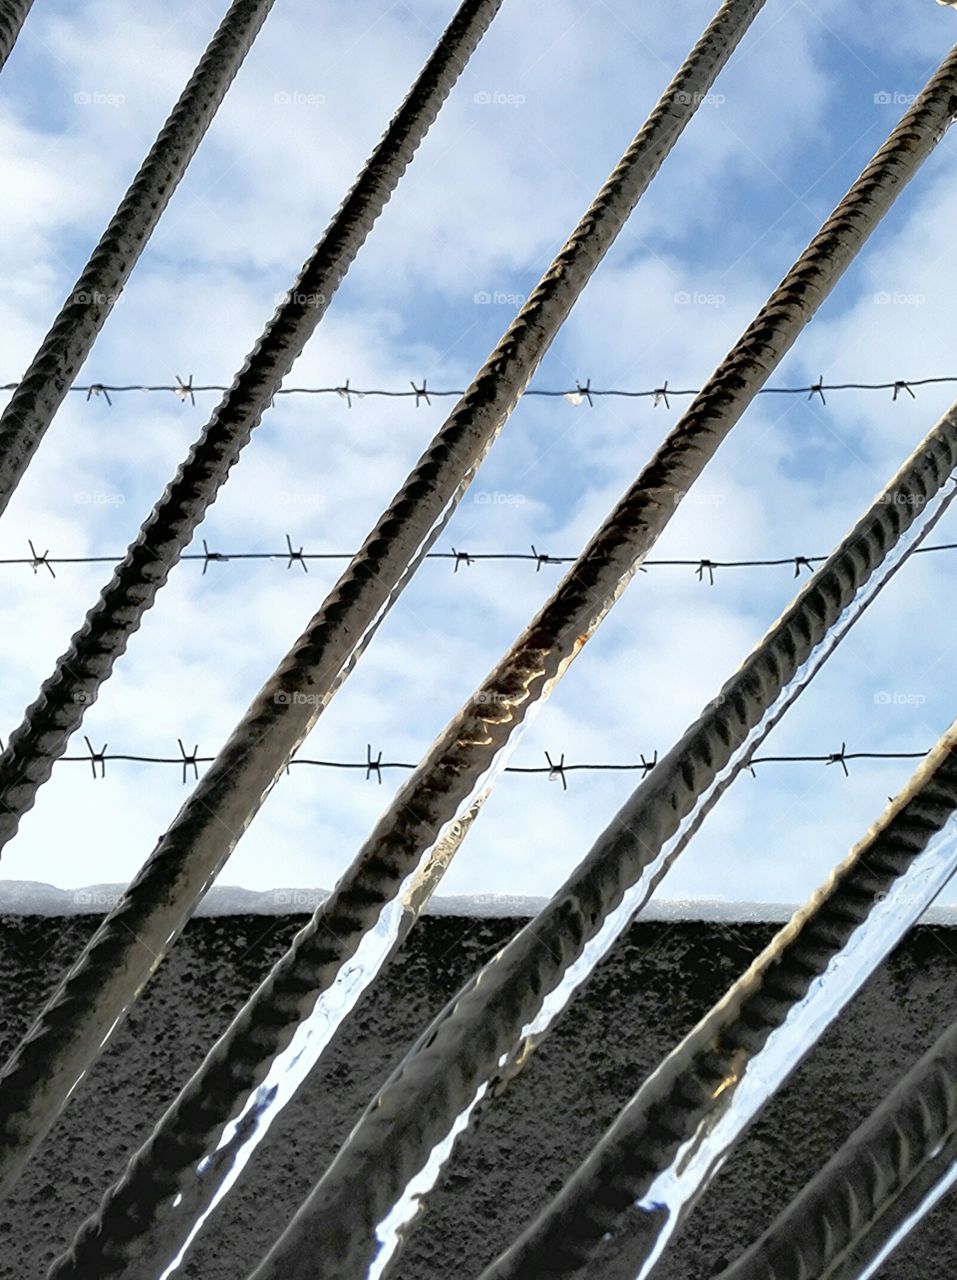 Window bars and barbed wire.